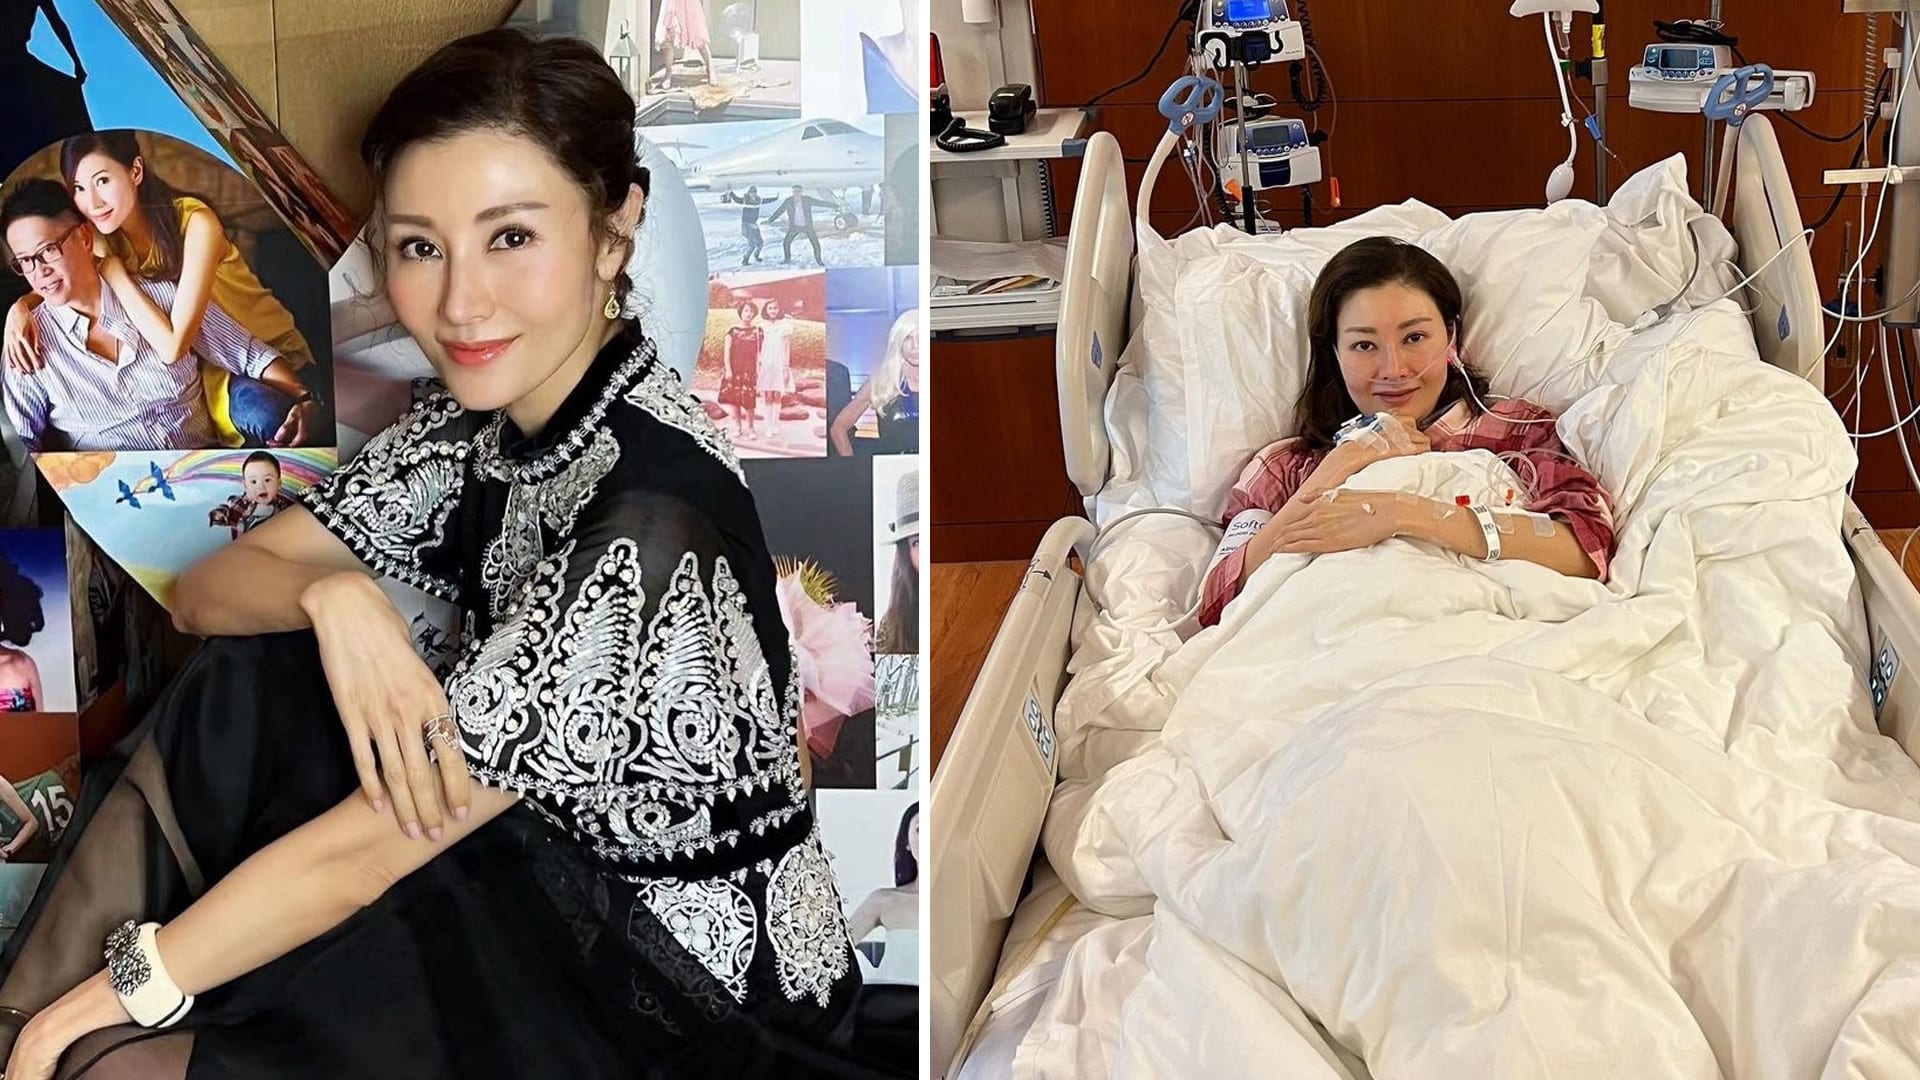 Michelle Reis Out Of ICU After Suffering Life-Threatening Condition, Says She “Narrowly Escaped Death”